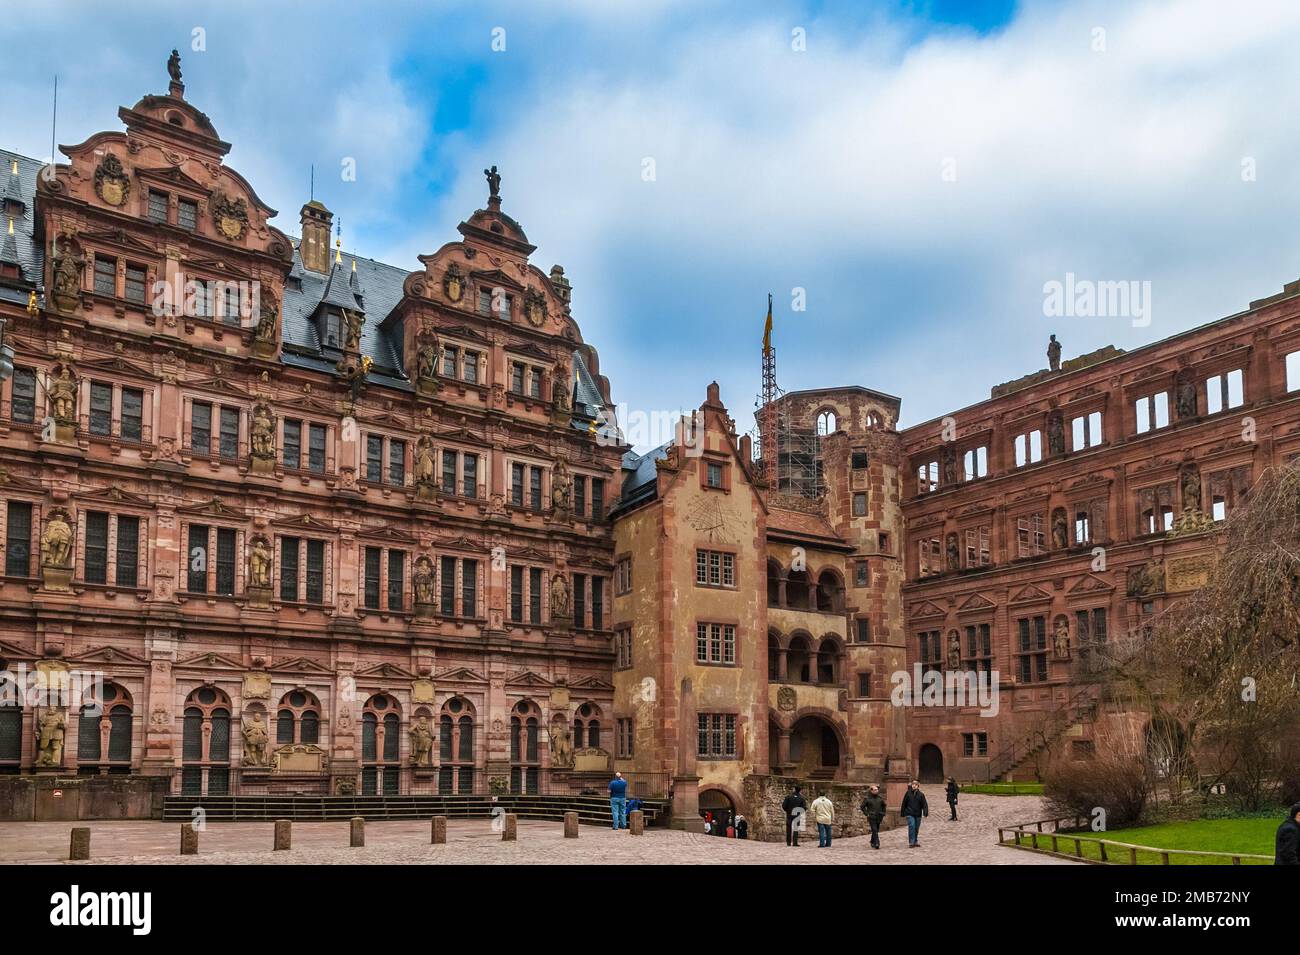 The courtyard of the castle ruin Heidelberger Schloss, Germany. Between the Friedrich’s Wing and the Ottheinrich’s Wing stands the Hall of Glass with... Stock Photo